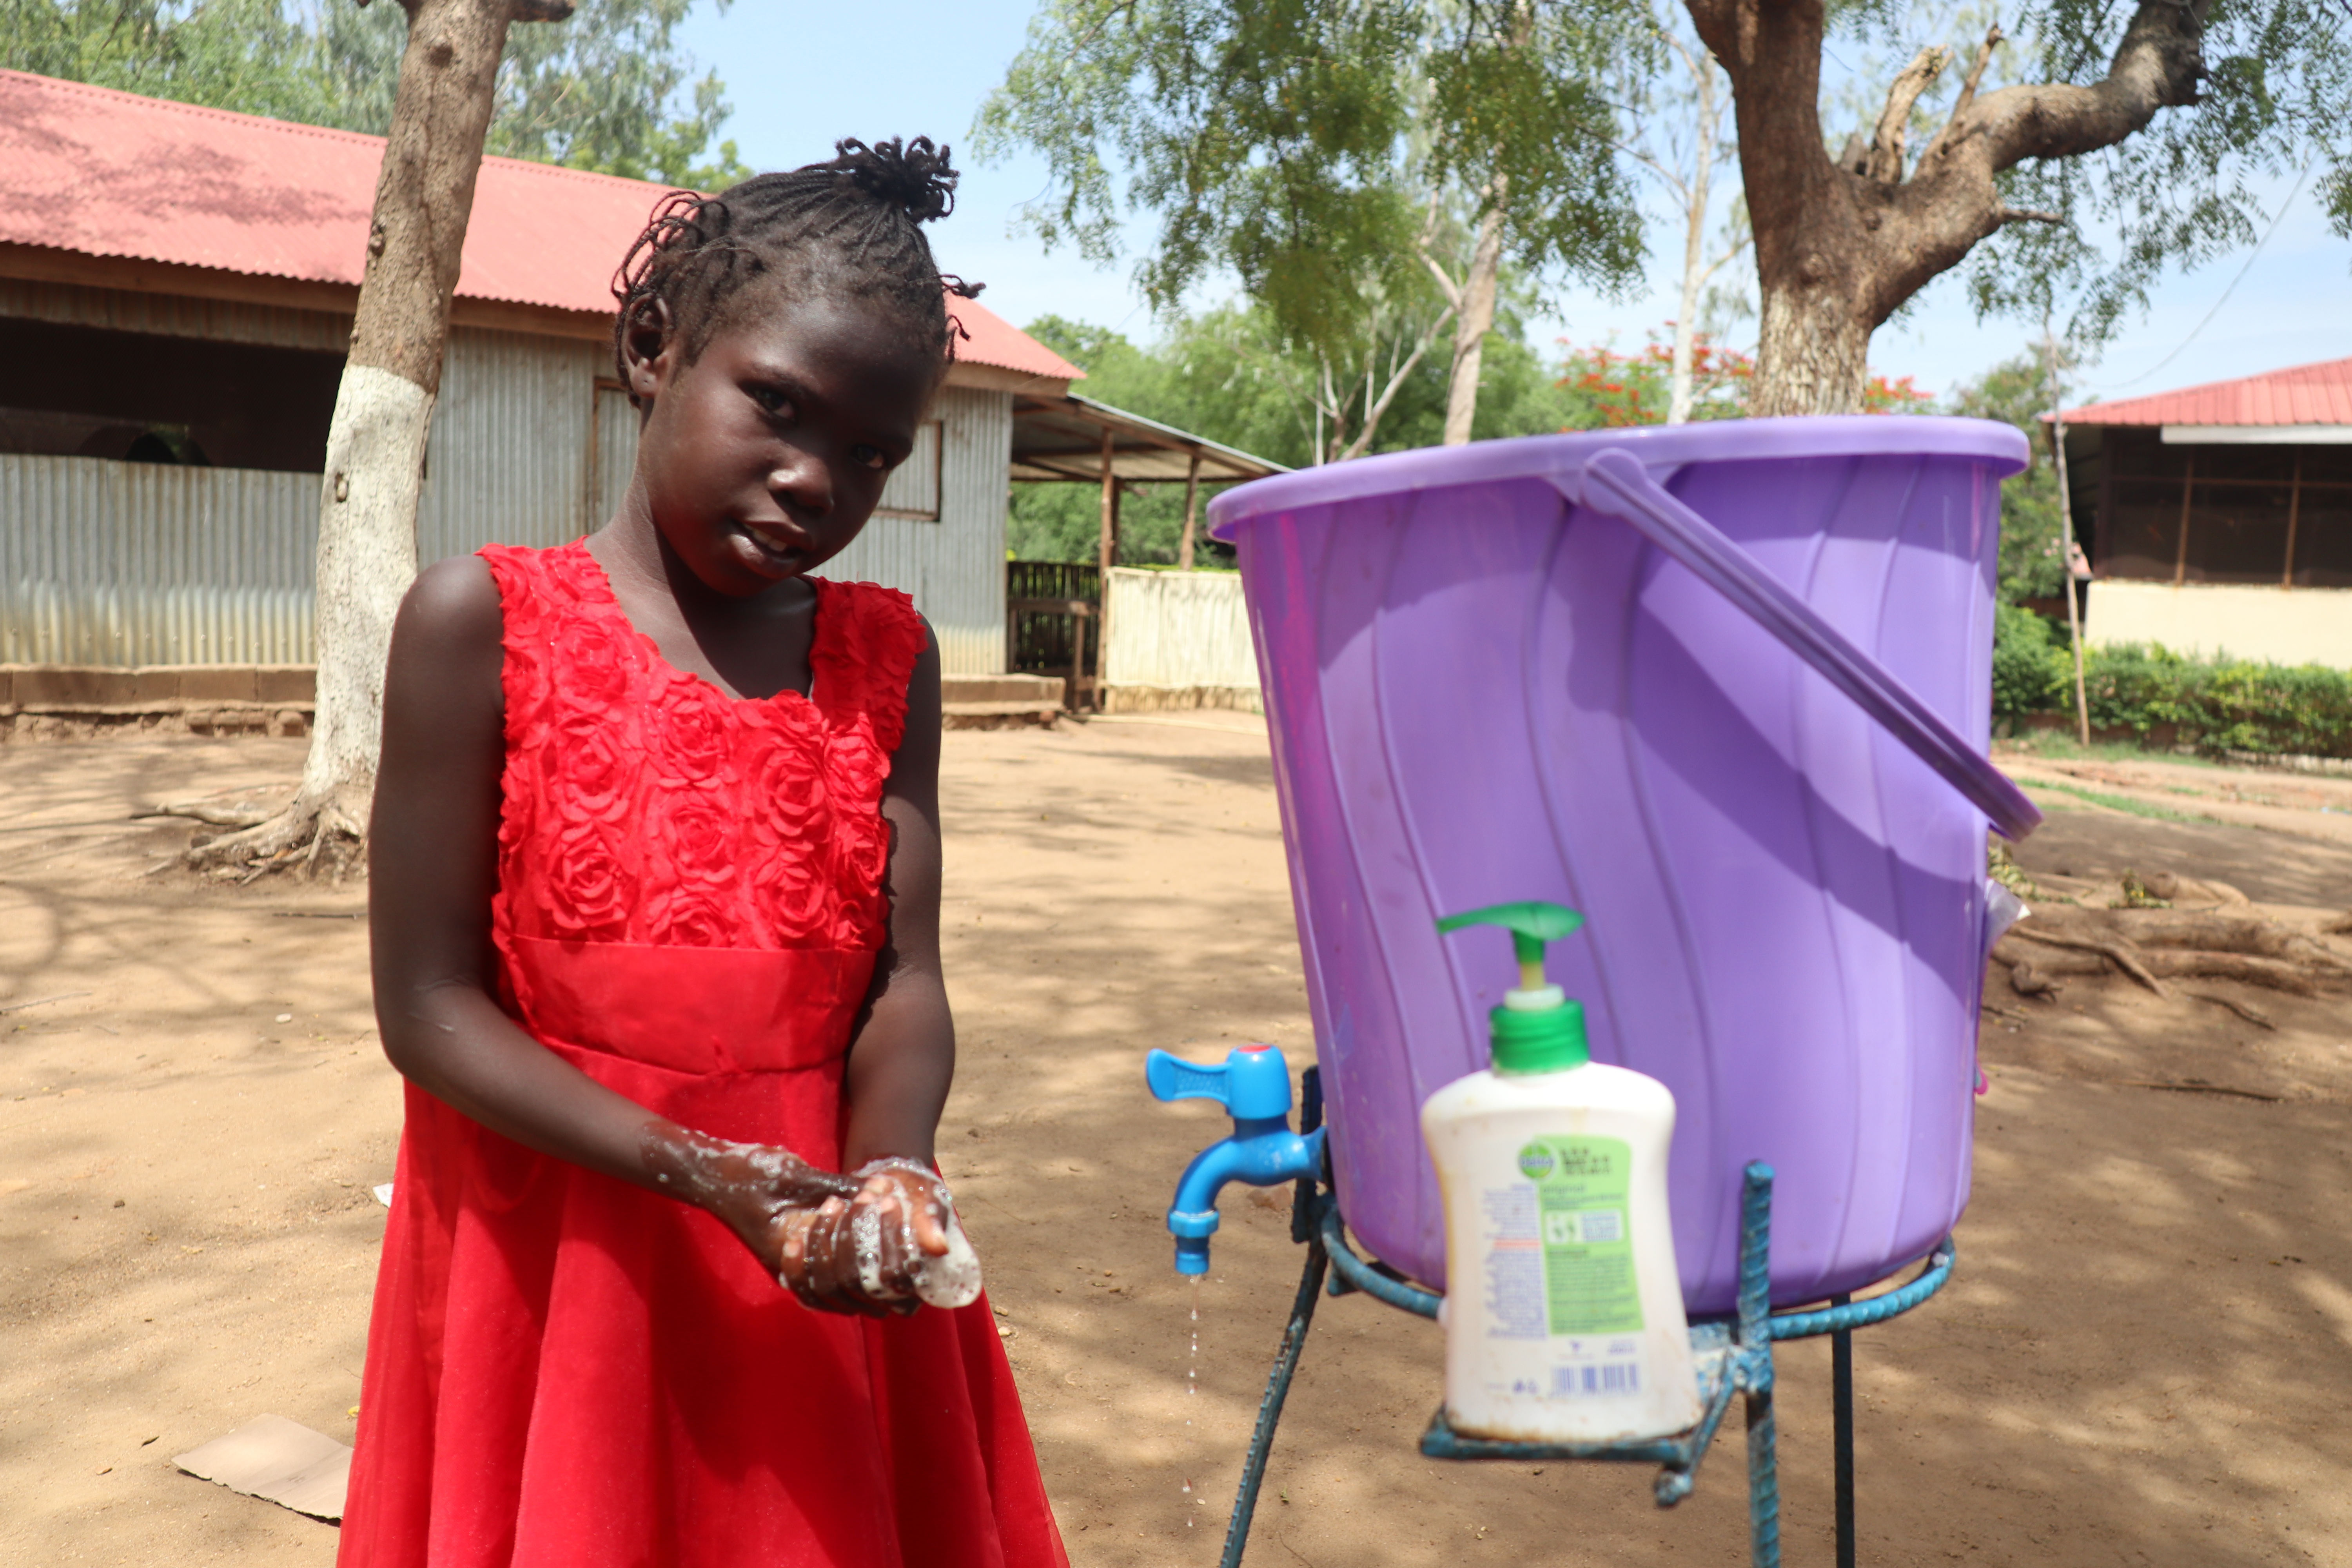 The surviving tradition of hand-washing clothes in Sudan - Global Times